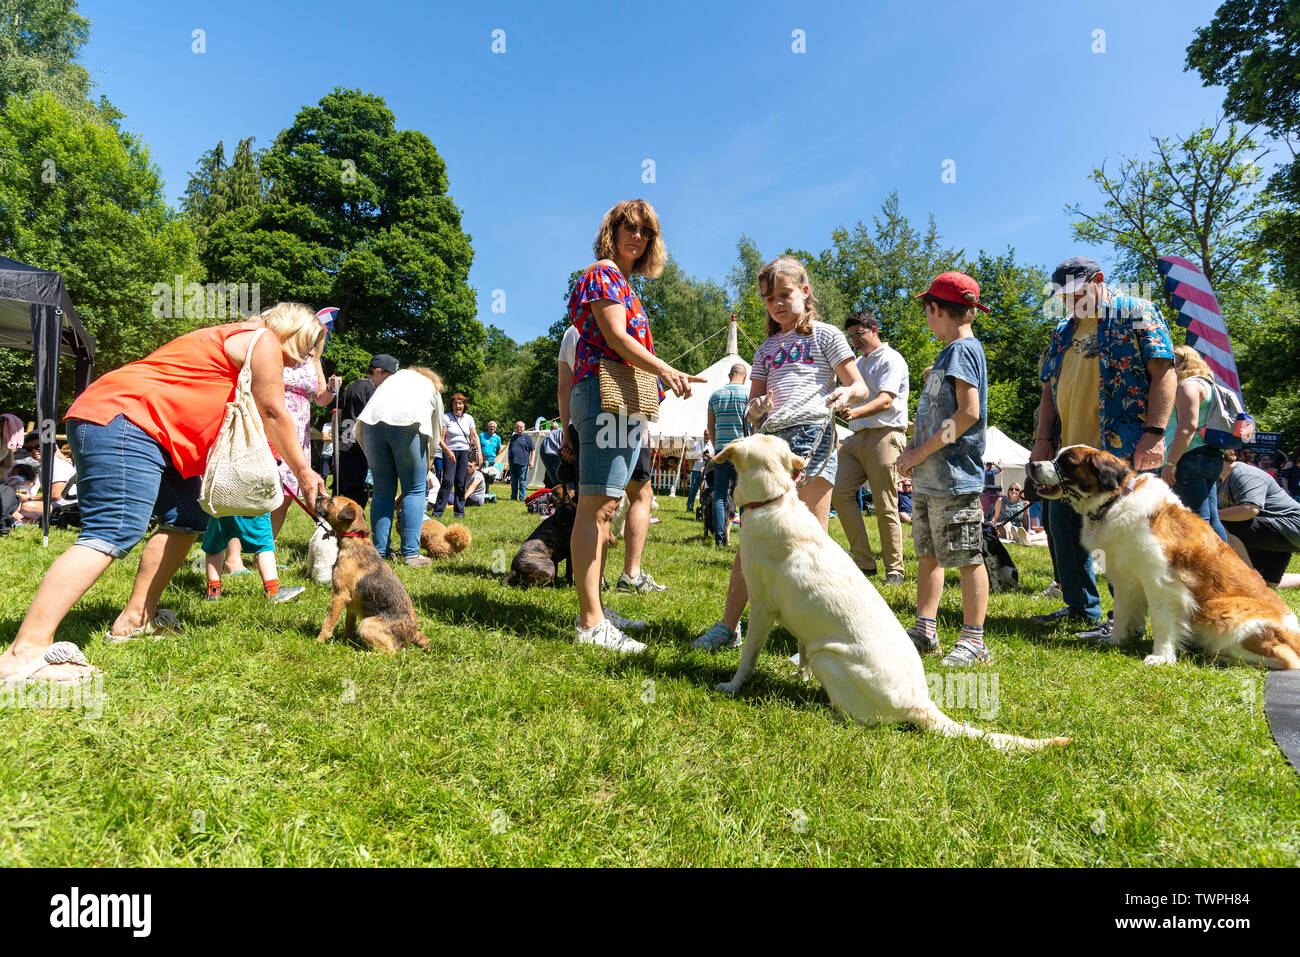 Fordingbridge, Hampshire, UK, 22nd June 2019. Sandy Balls New Forest Holiday Village celebrates its 100 year anniversary with festival in the woods, open to the public. Dogs and their owners put training into practice in the dog show obedience class. Credit: Paul Biggins/Alamy Live News Stock Photo